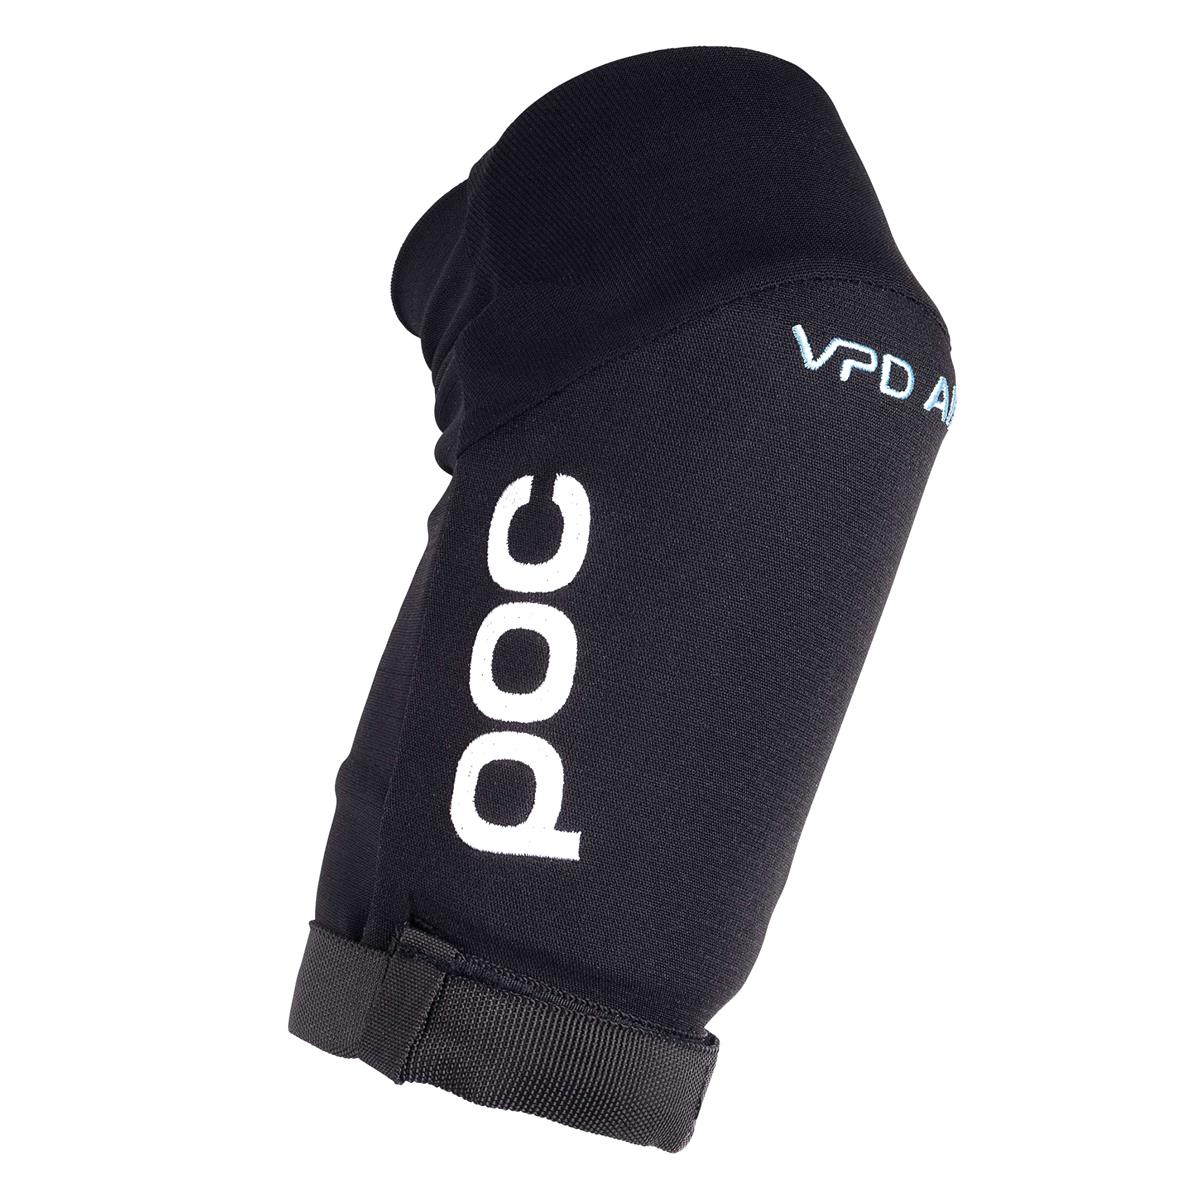 Joint VPD Air Elbow pads Black Size XL